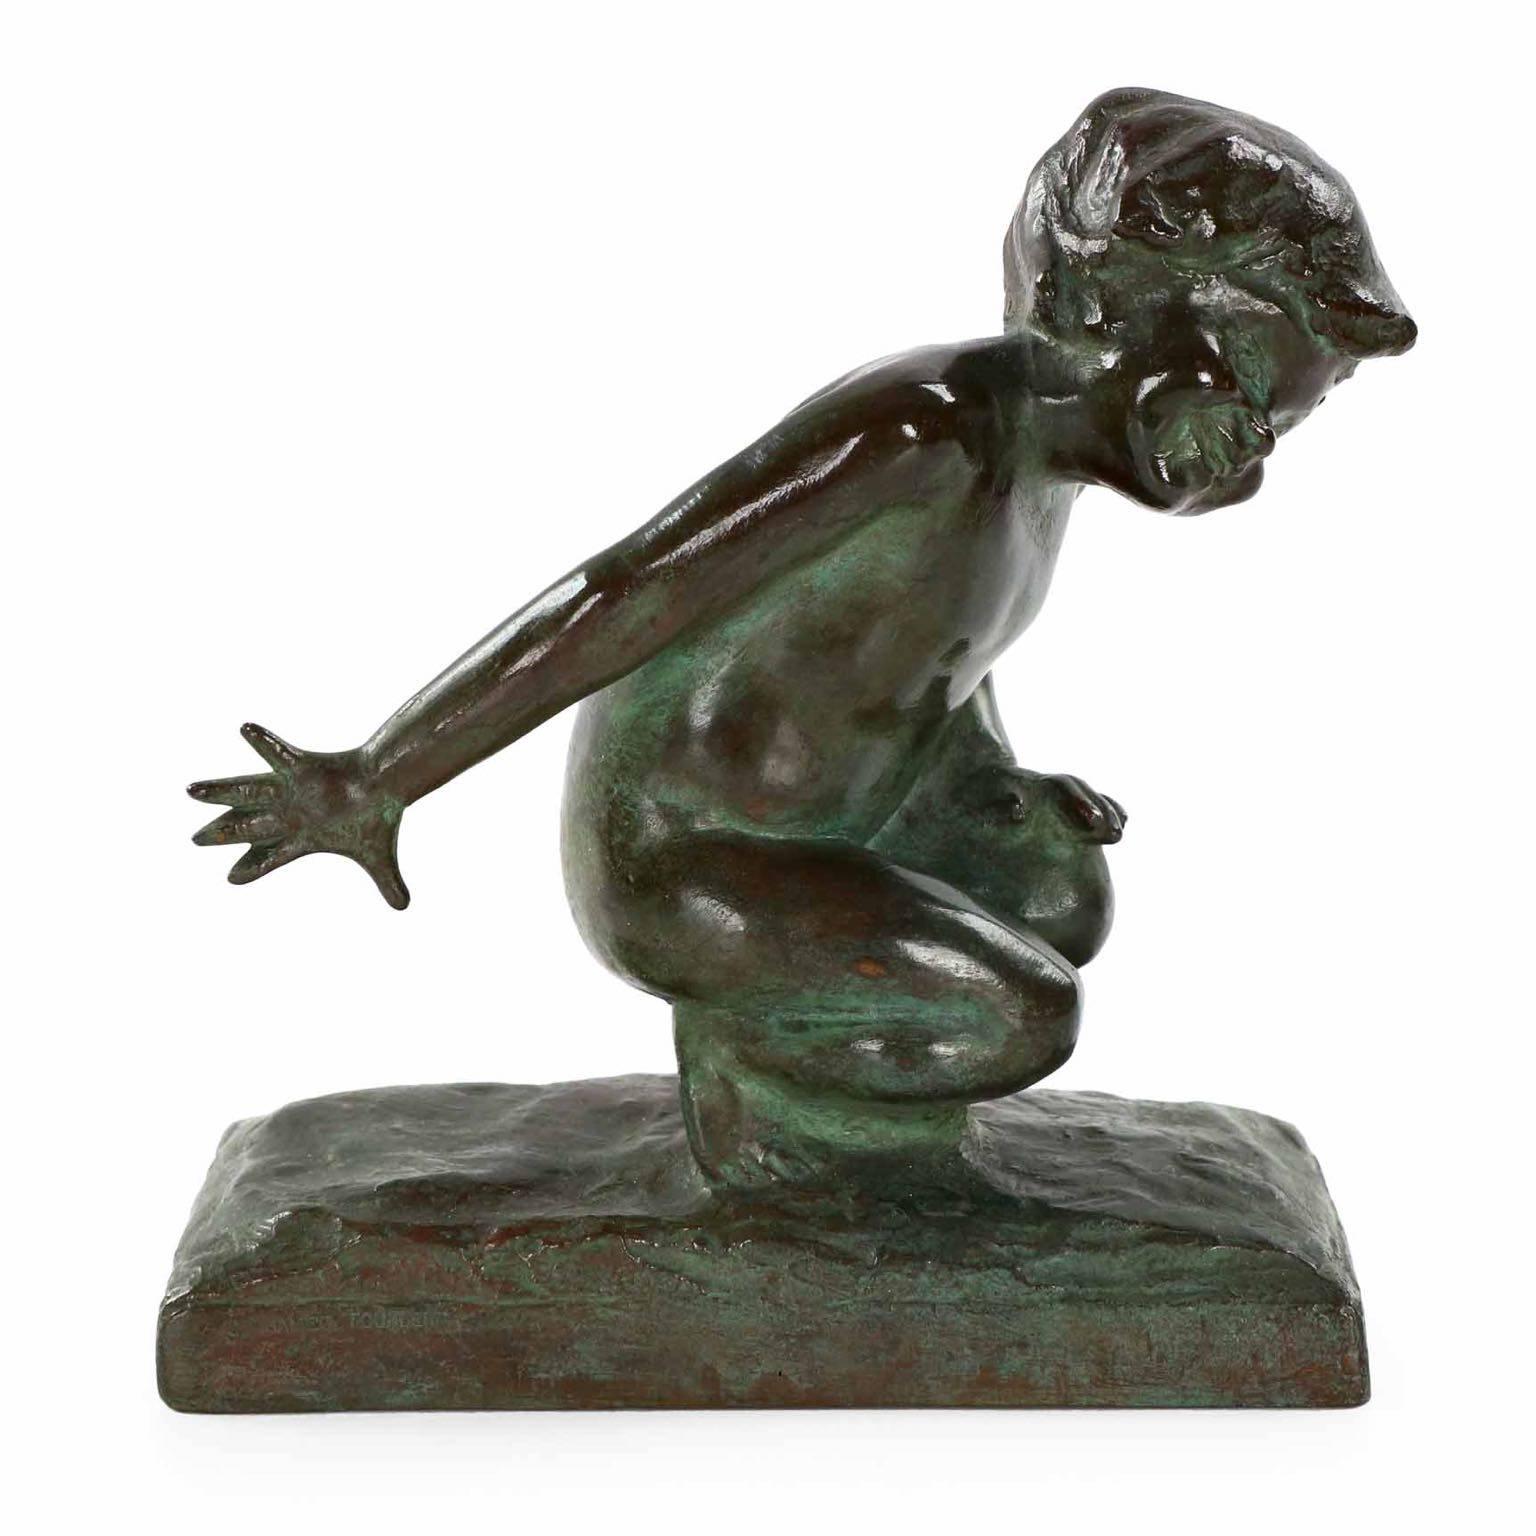 A precious rendition of childhood executed by Edith Parsons and cast by the Gorham Co. foundry in New York, this exquisite little work captures a young child with his hand outstretched to a companion out of sight. The casting quality is simply